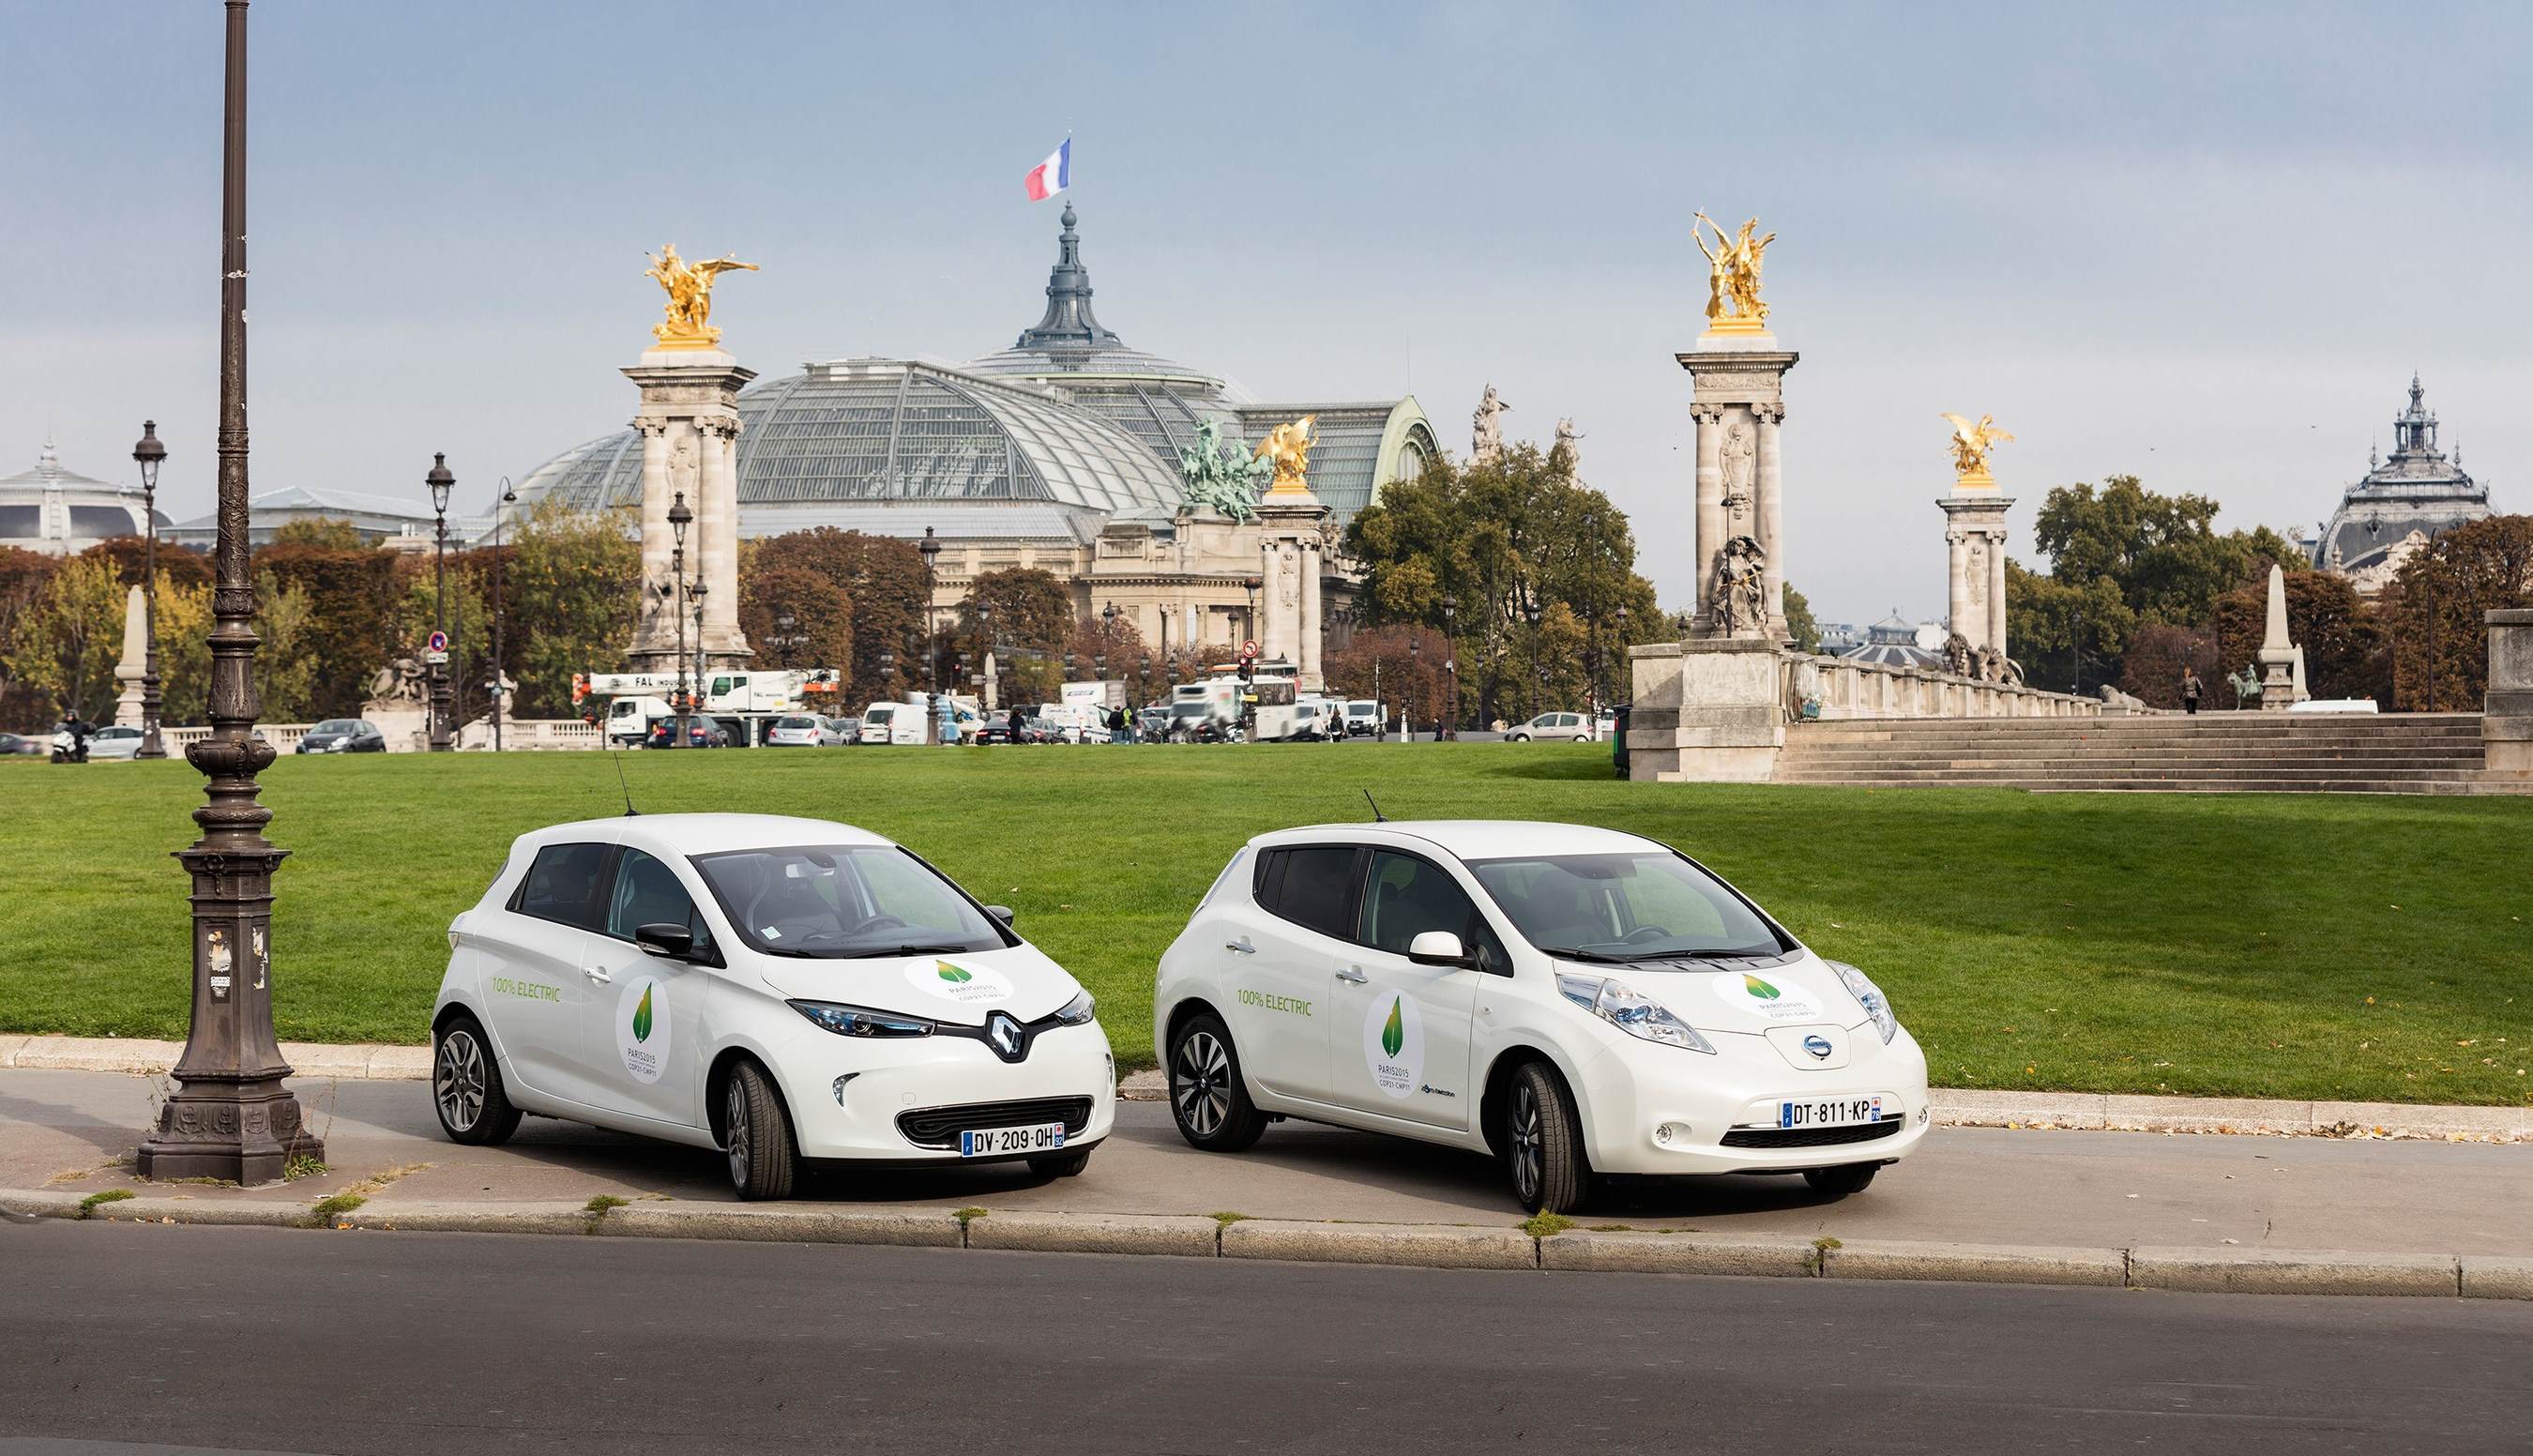 ZOE and LEAF in front of le Grand Palais in Paris (C) Renault /omg Name of the Photographer: Olivier Martin Gambier (PRNewsFoto/Renault-Nissan Alliance) (PRNewsFoto/Renault-Nissan Alliance)